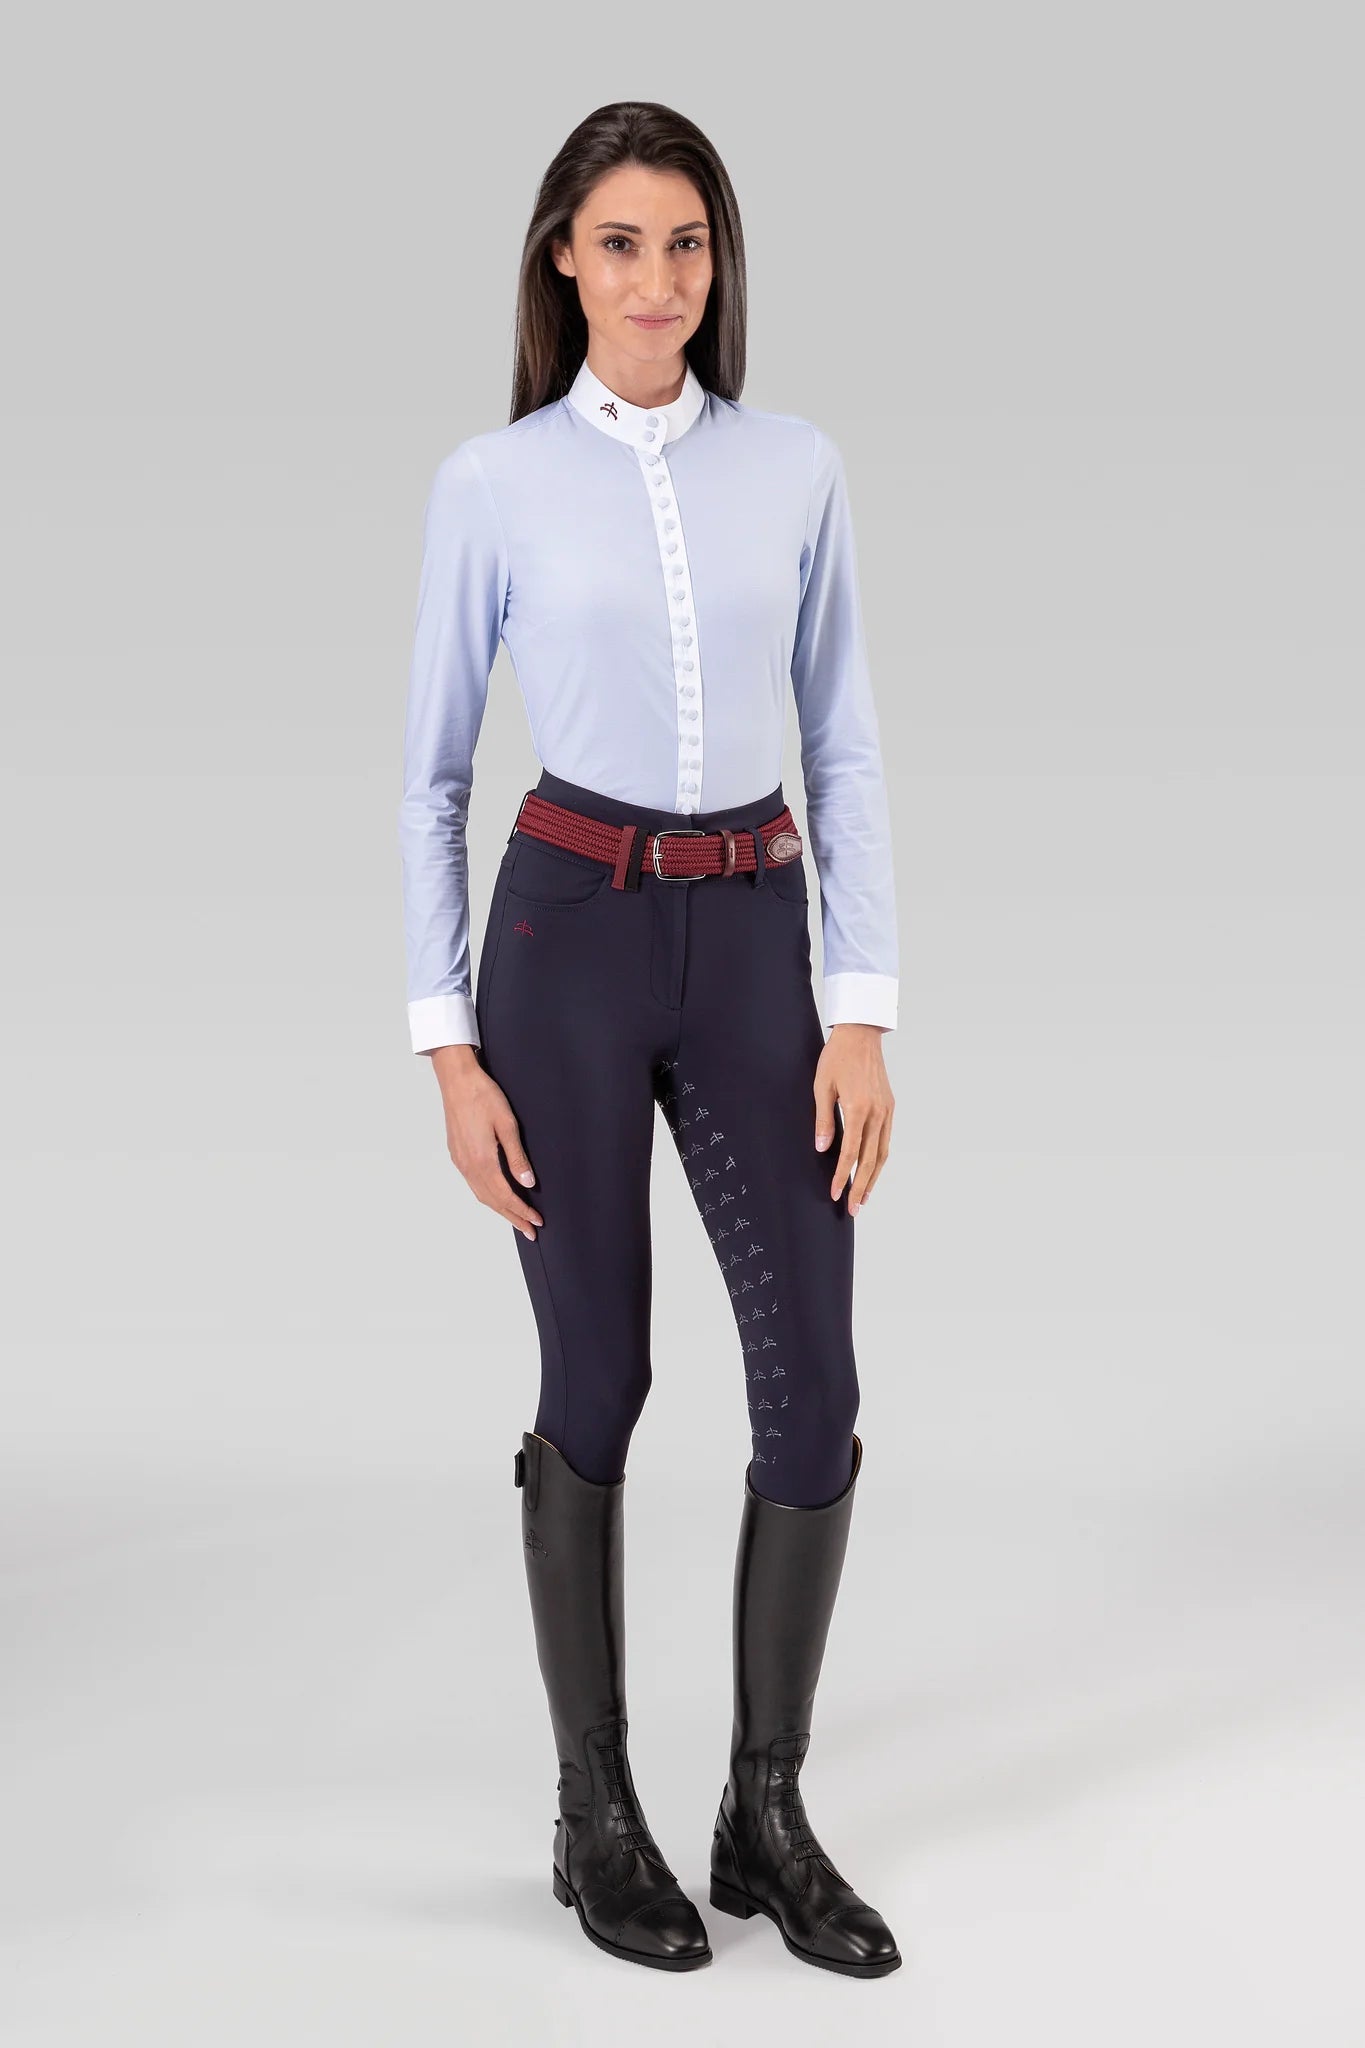 MAKEBE -  DAFNE “A thousand buttons” Ladies Long Sleeve Shirt